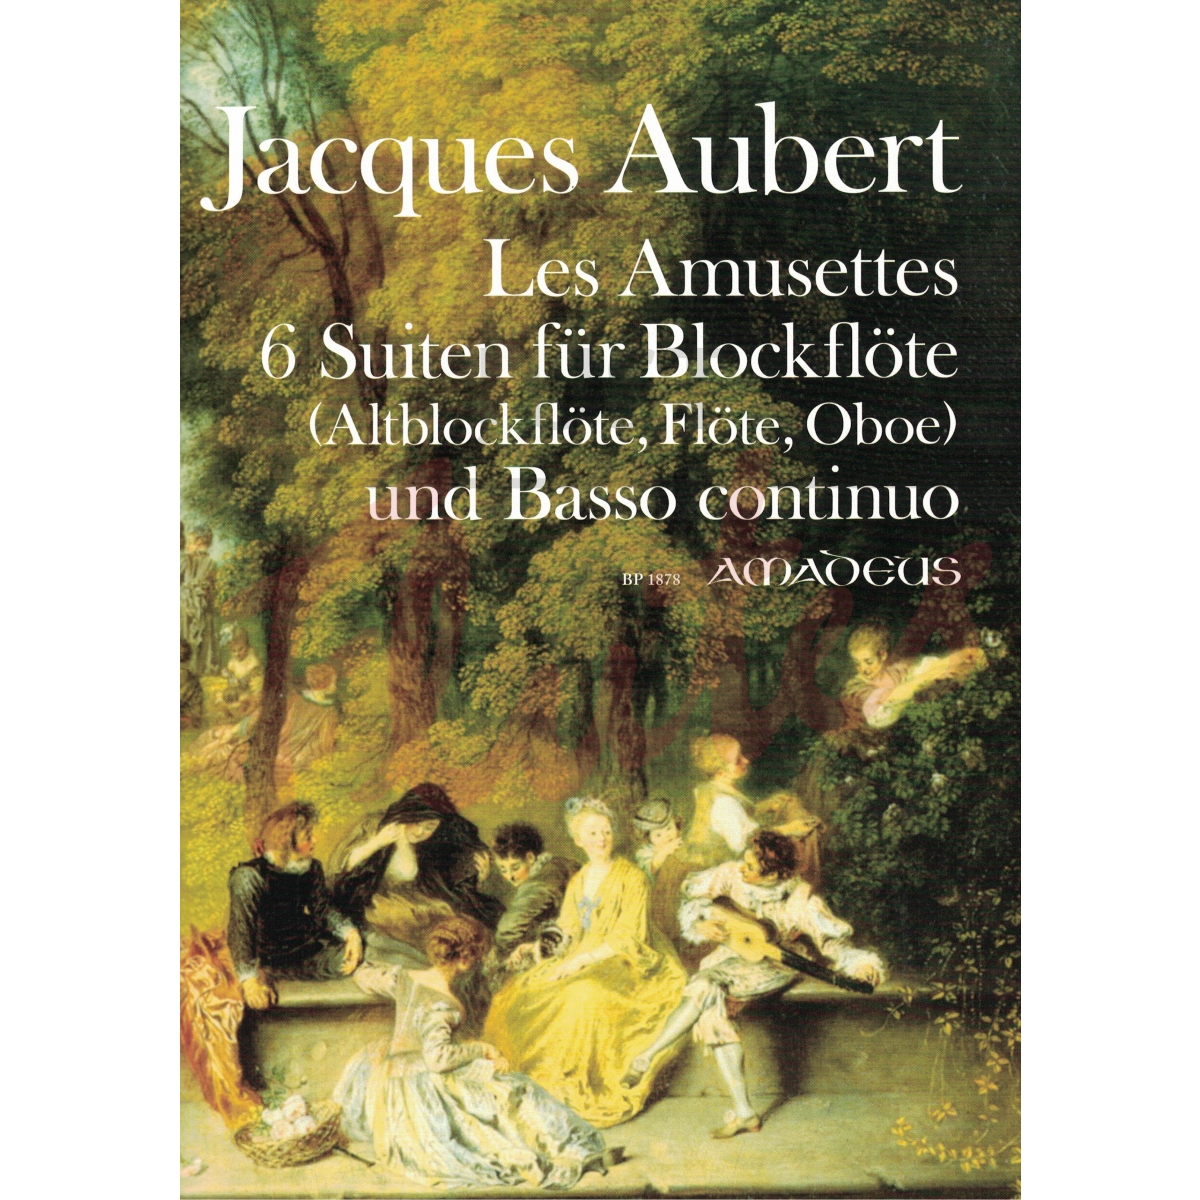 Les Amusettes - Six Suites for Recorder or Flute and Continuo